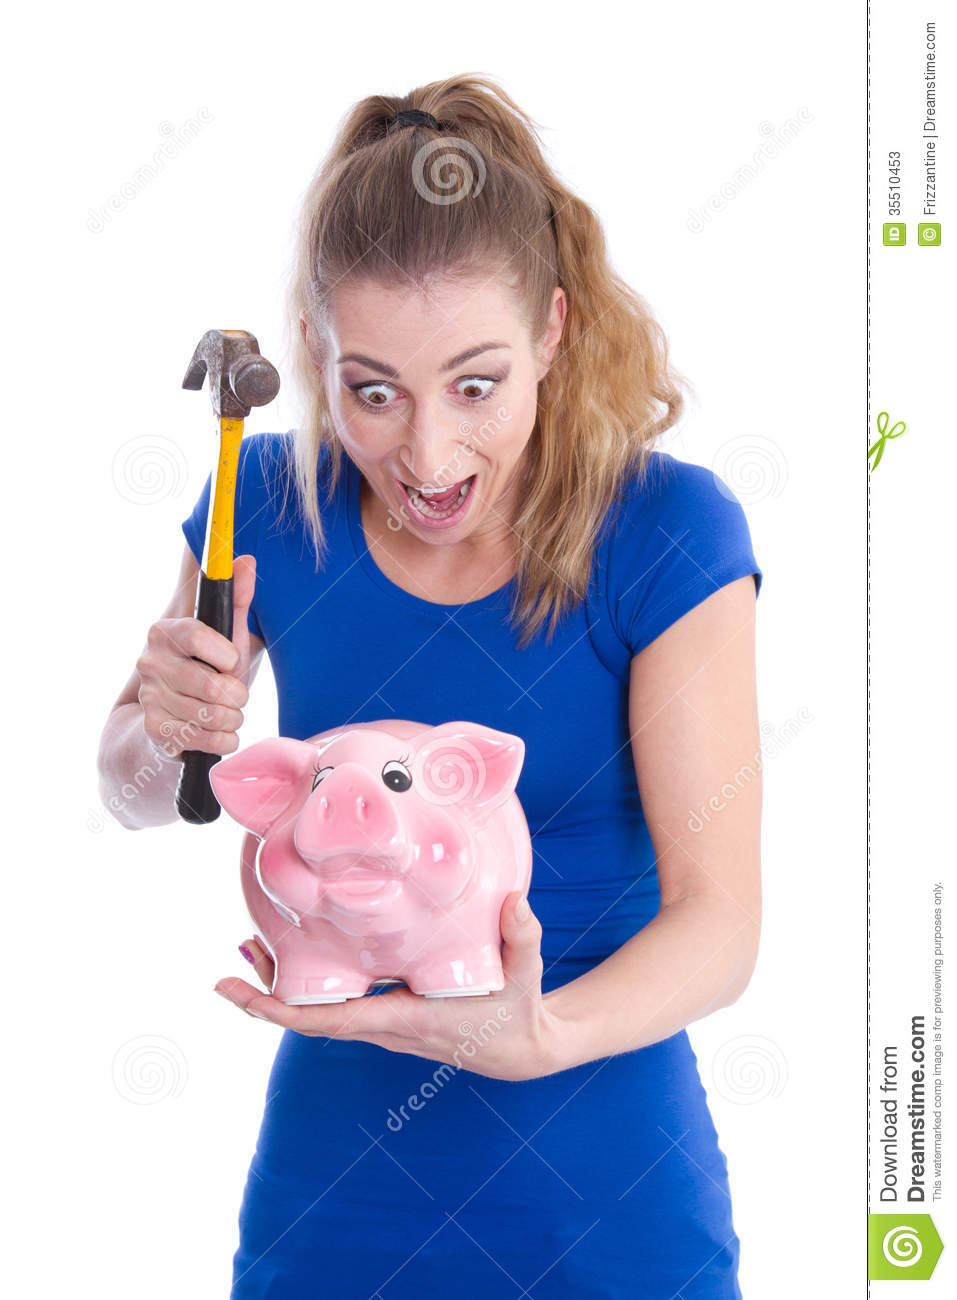 Disappointed Woman With Gift Stock Photos   Image  35510453